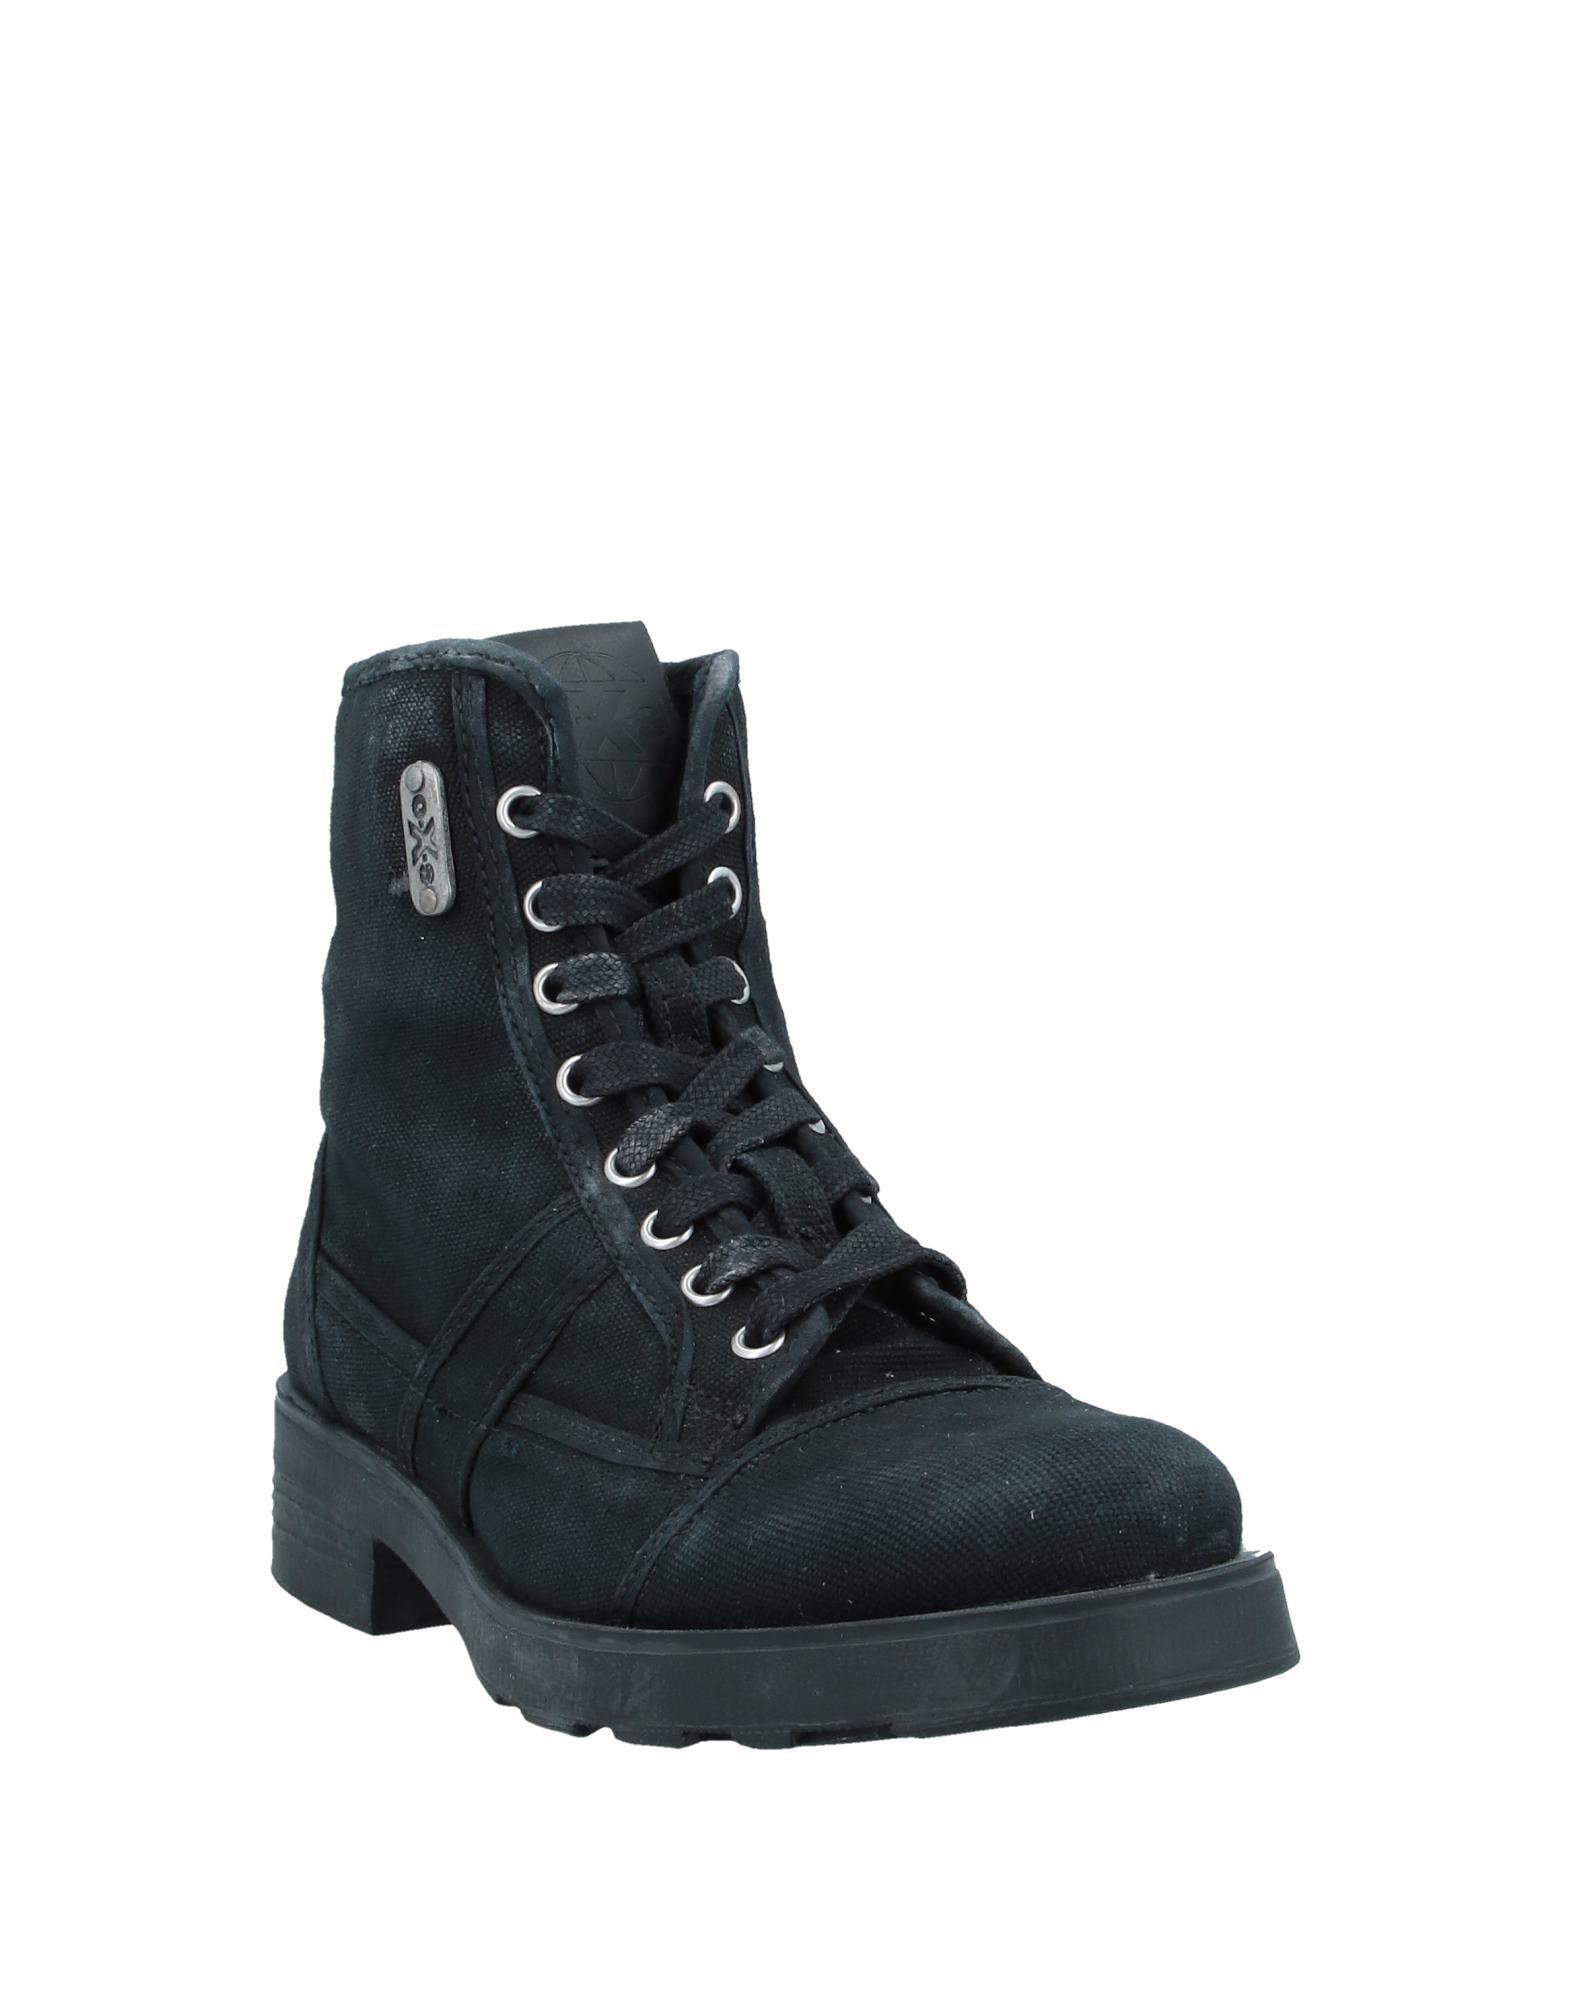 O.x.s. Ankle Boots in Black | Lyst